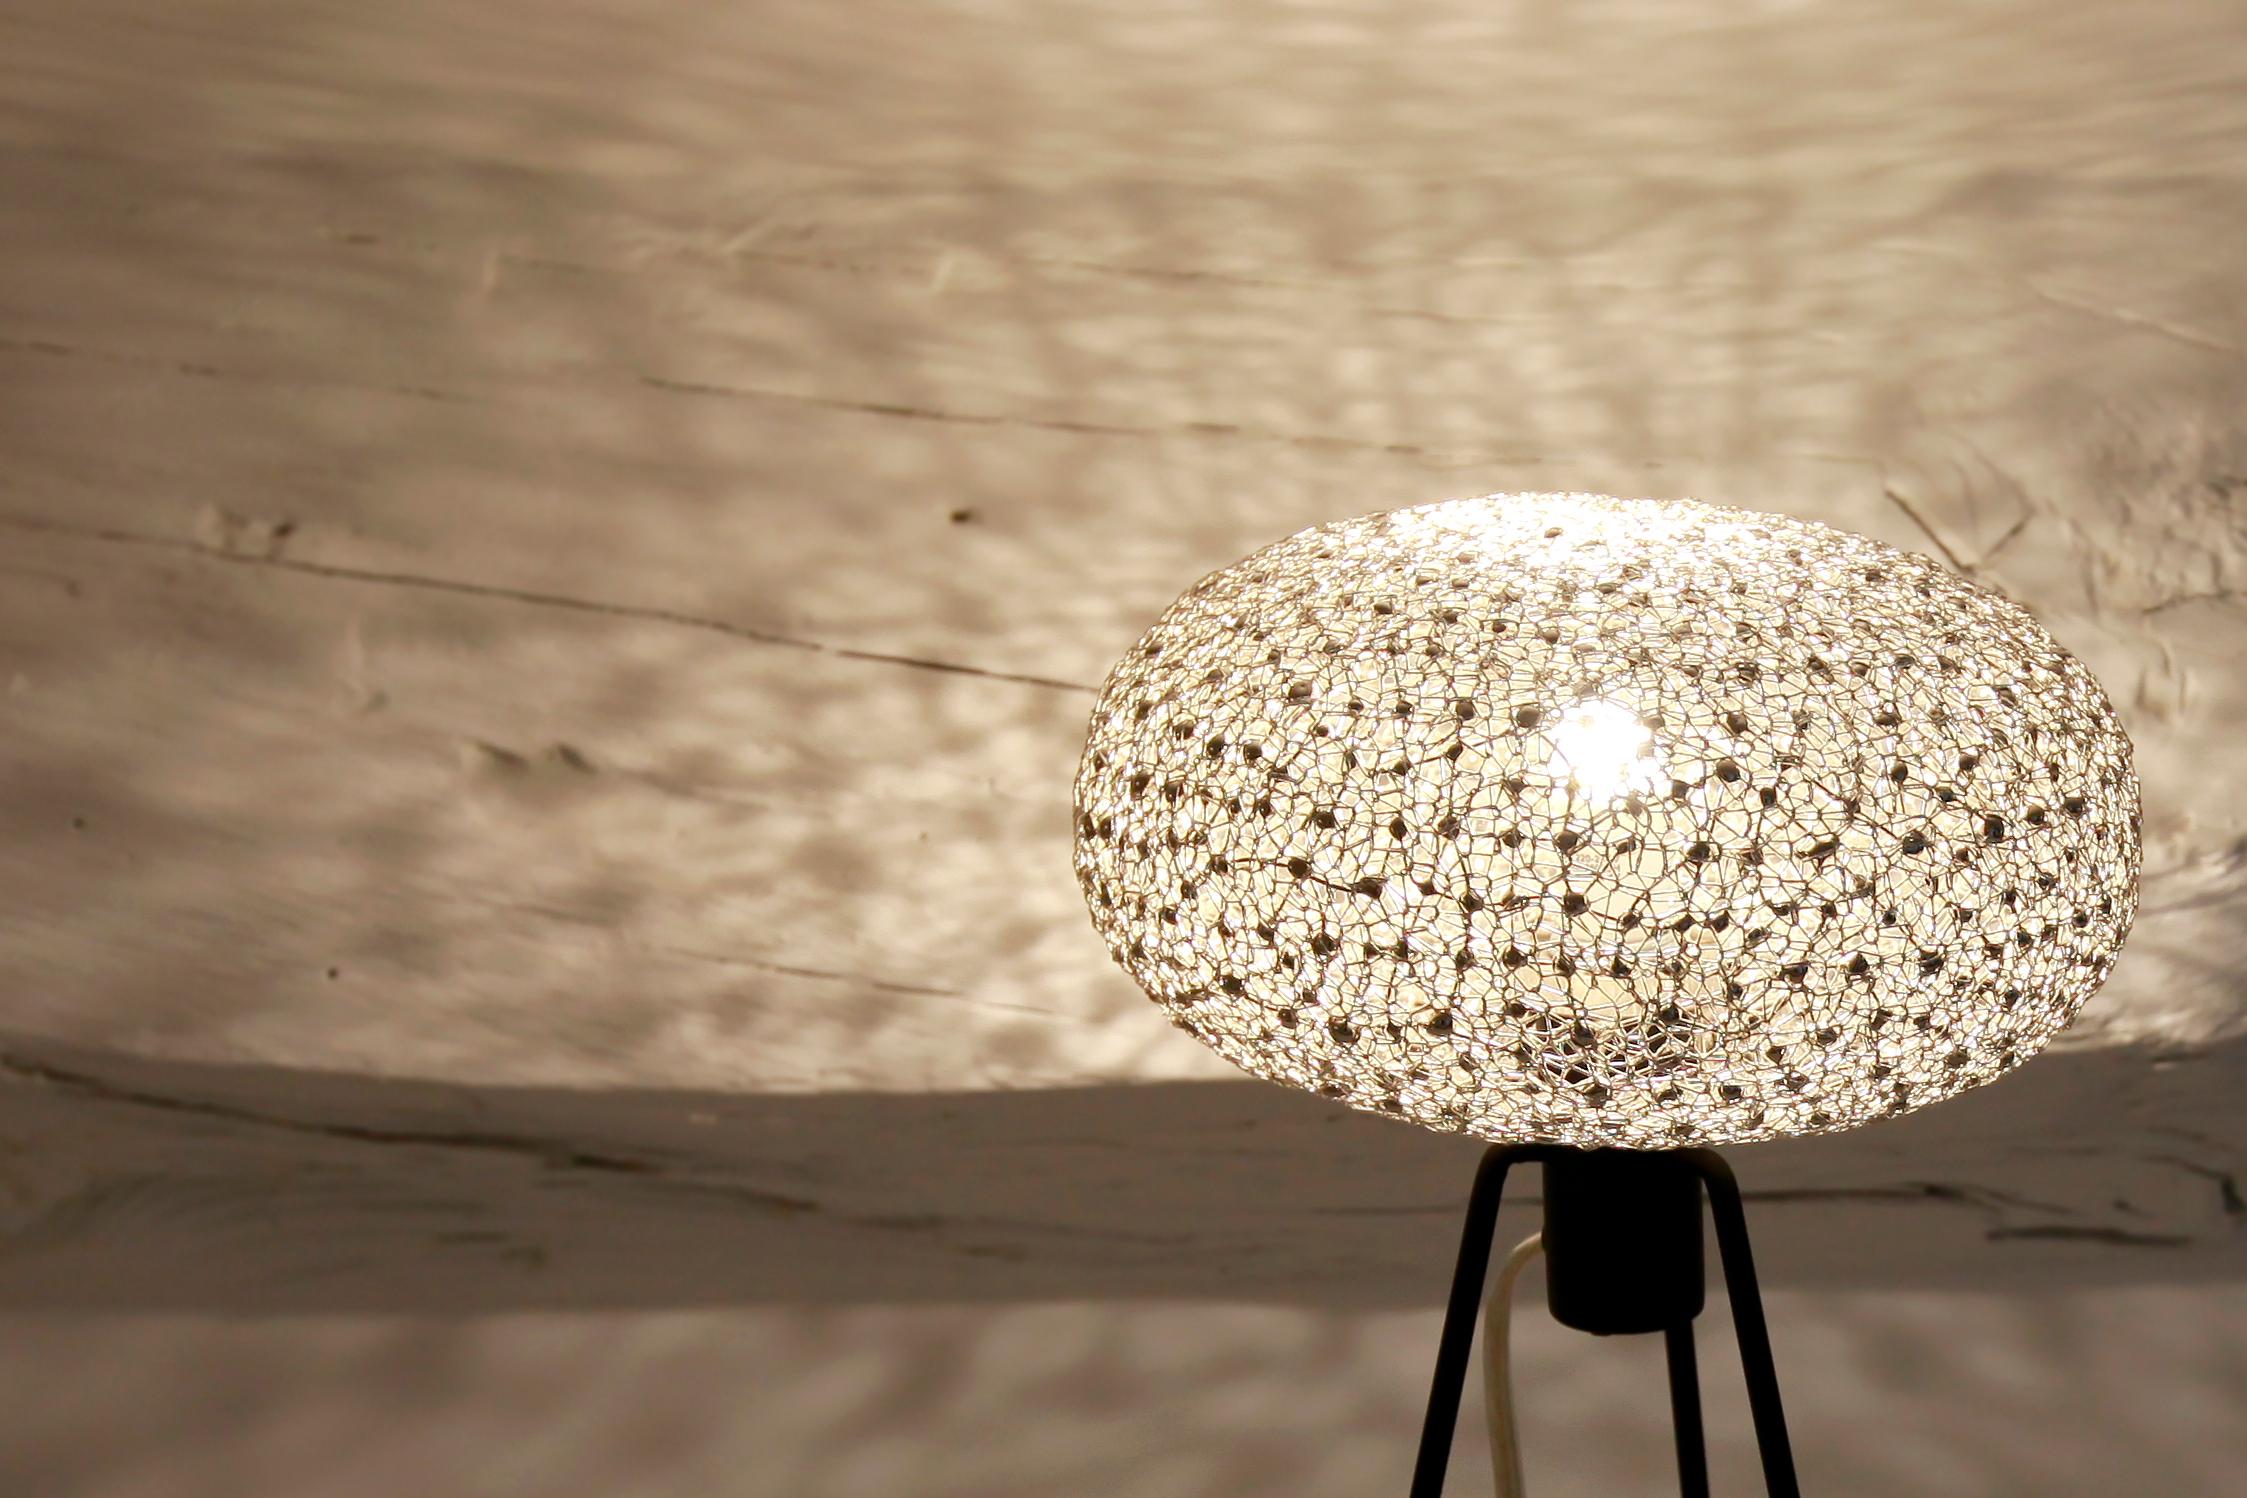 Electro T lamp table, originally created for the Hotel Chavanel, Paris with Ango signature hand-welded and crocheted technique. Electro T is within a series forming part of Ango's ongoing narrative about nature and technology, and each piece